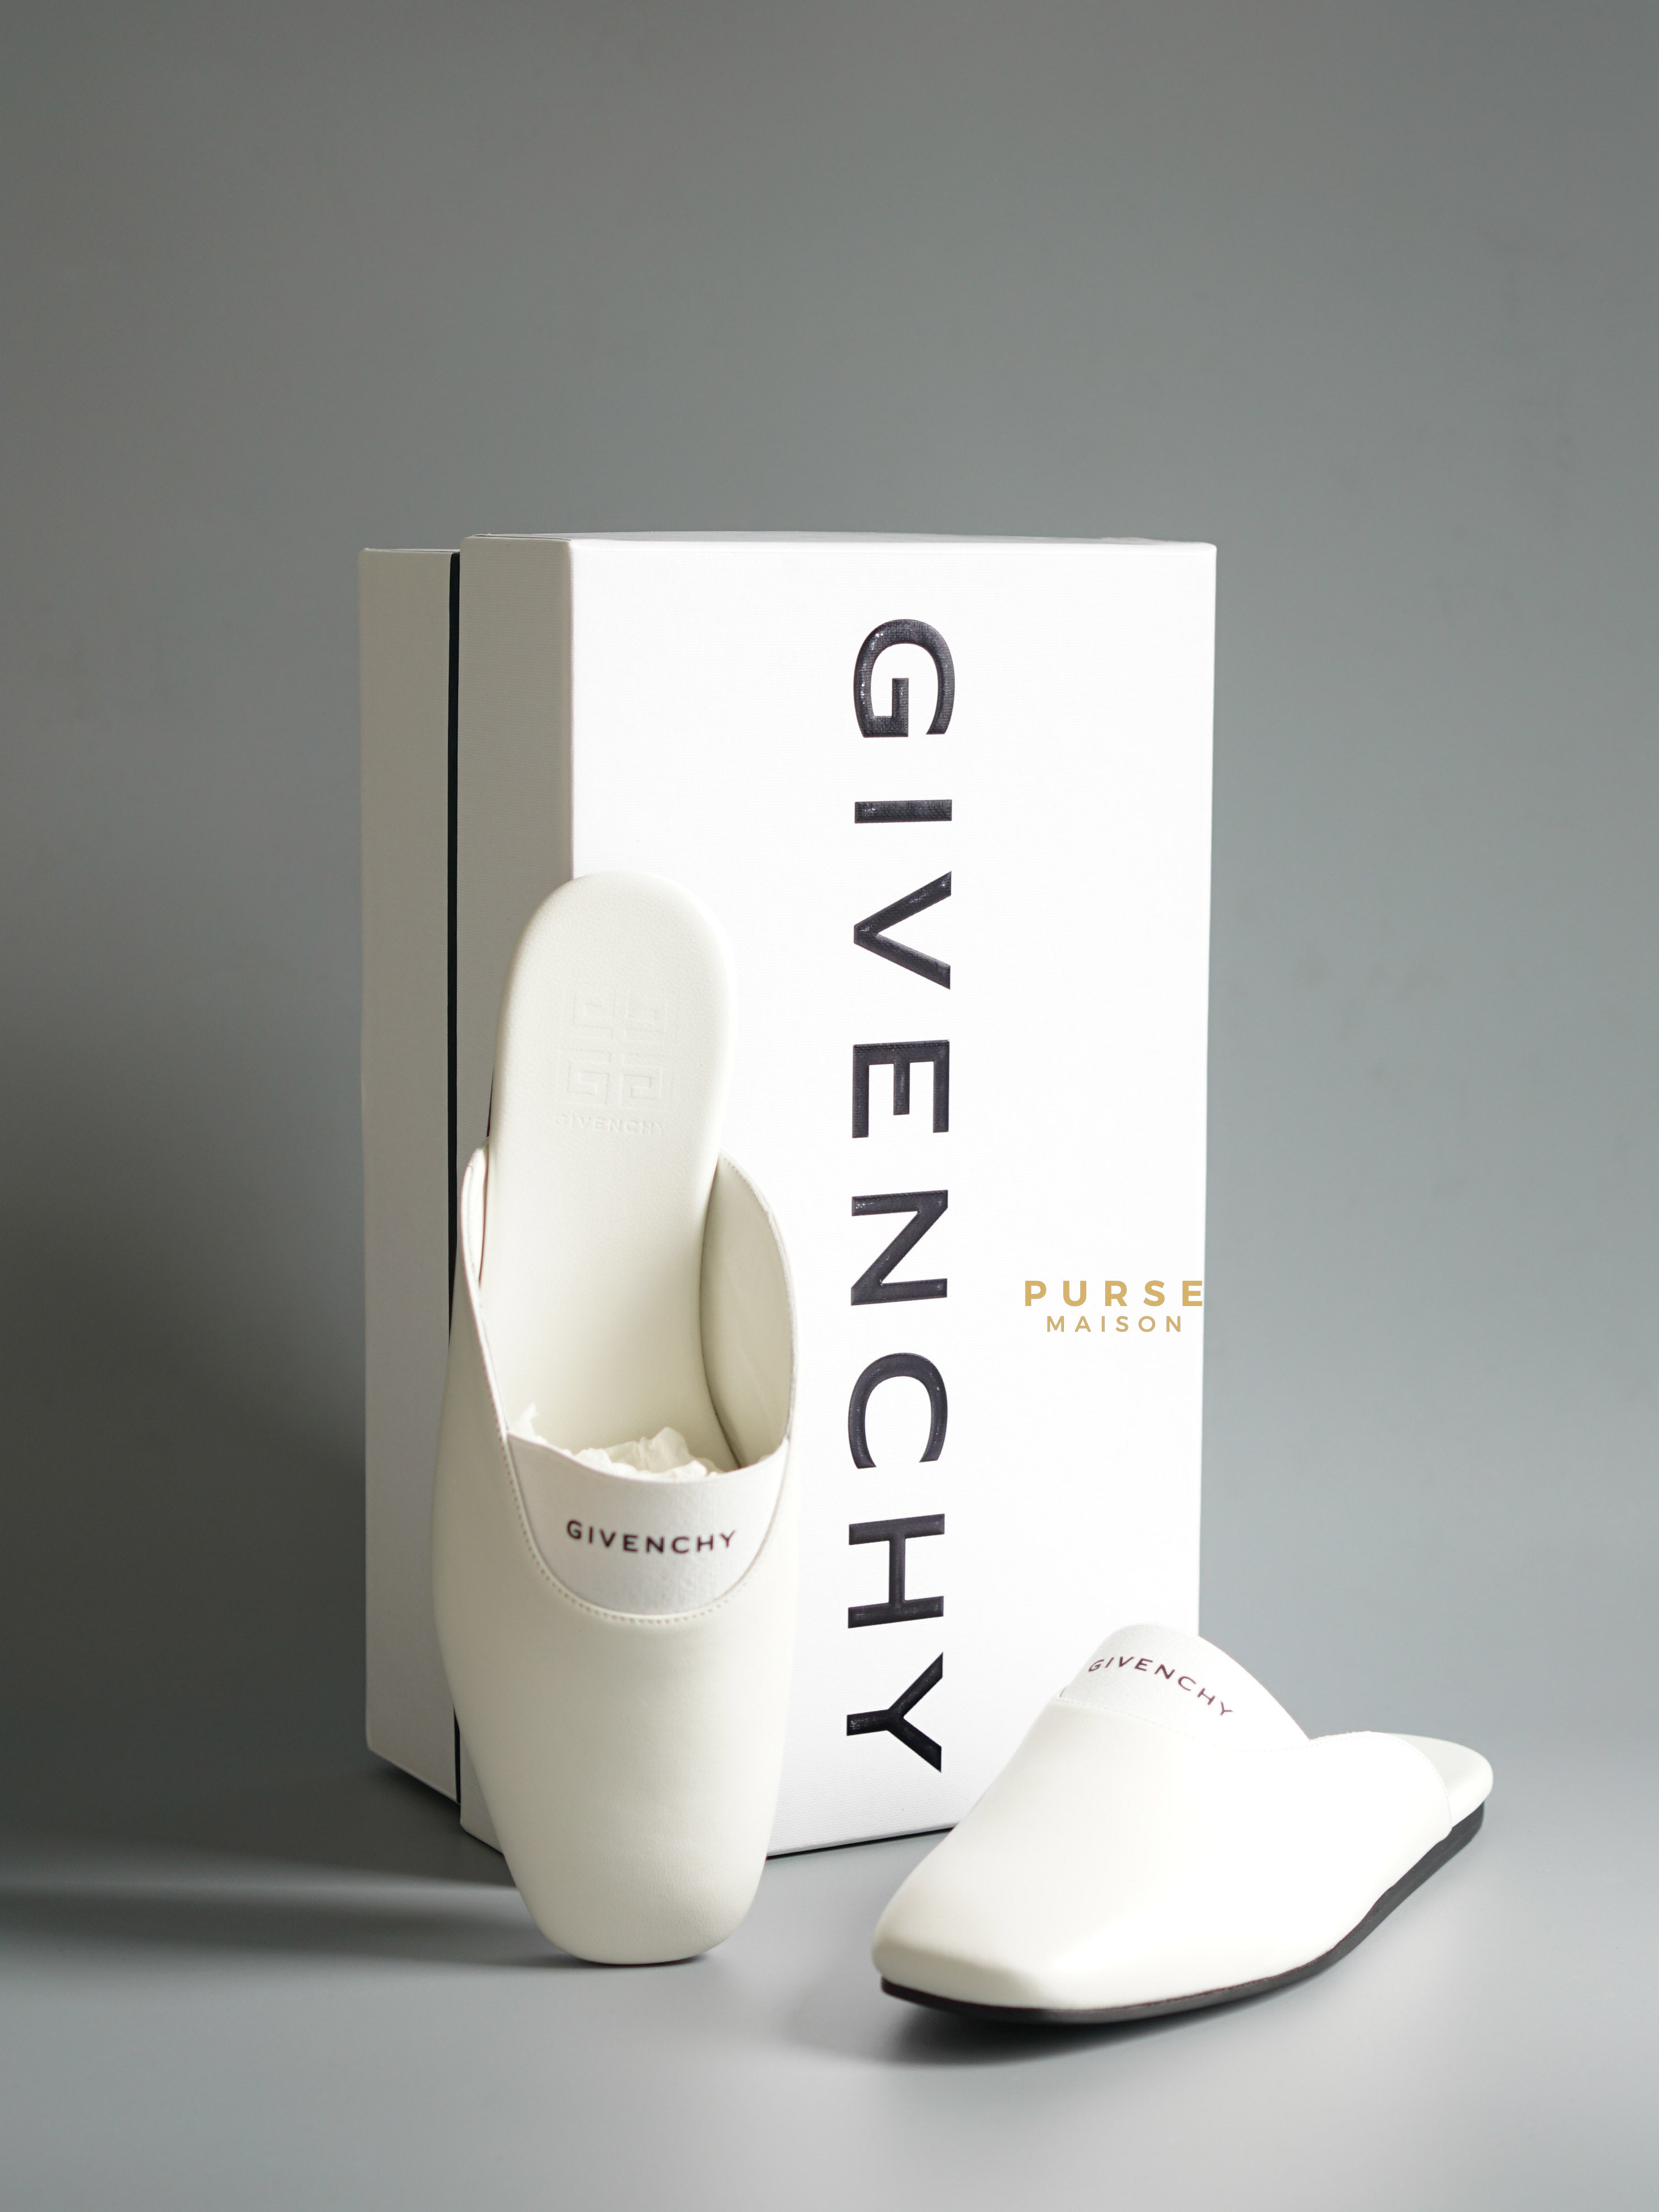 Givenchy Bedford in Ivory Lambskin Leather Mules Size 36 EU (24.5cm) | Purse Maison Luxury Bags Shop